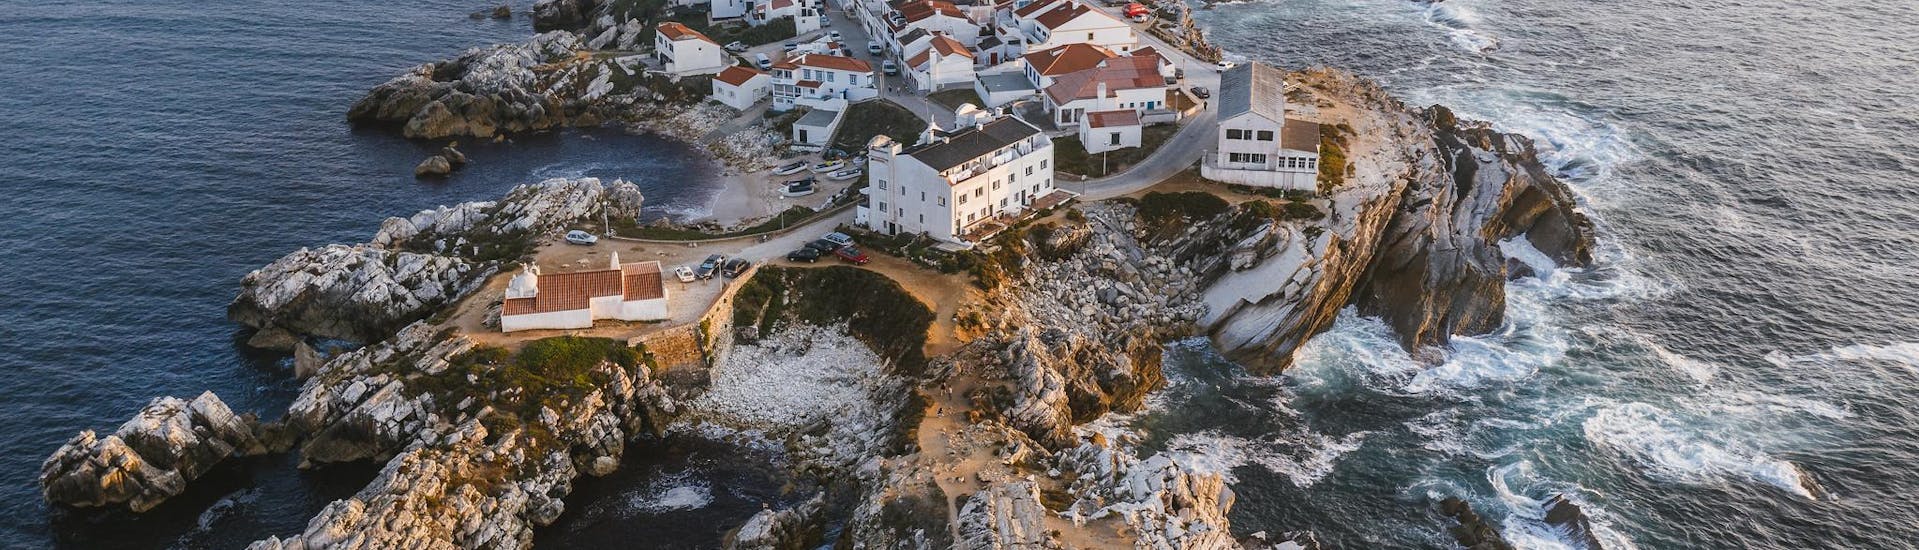 The rocky peninsula of Peniche, a popular starting point of boat trips in the Centro region of Portugal.